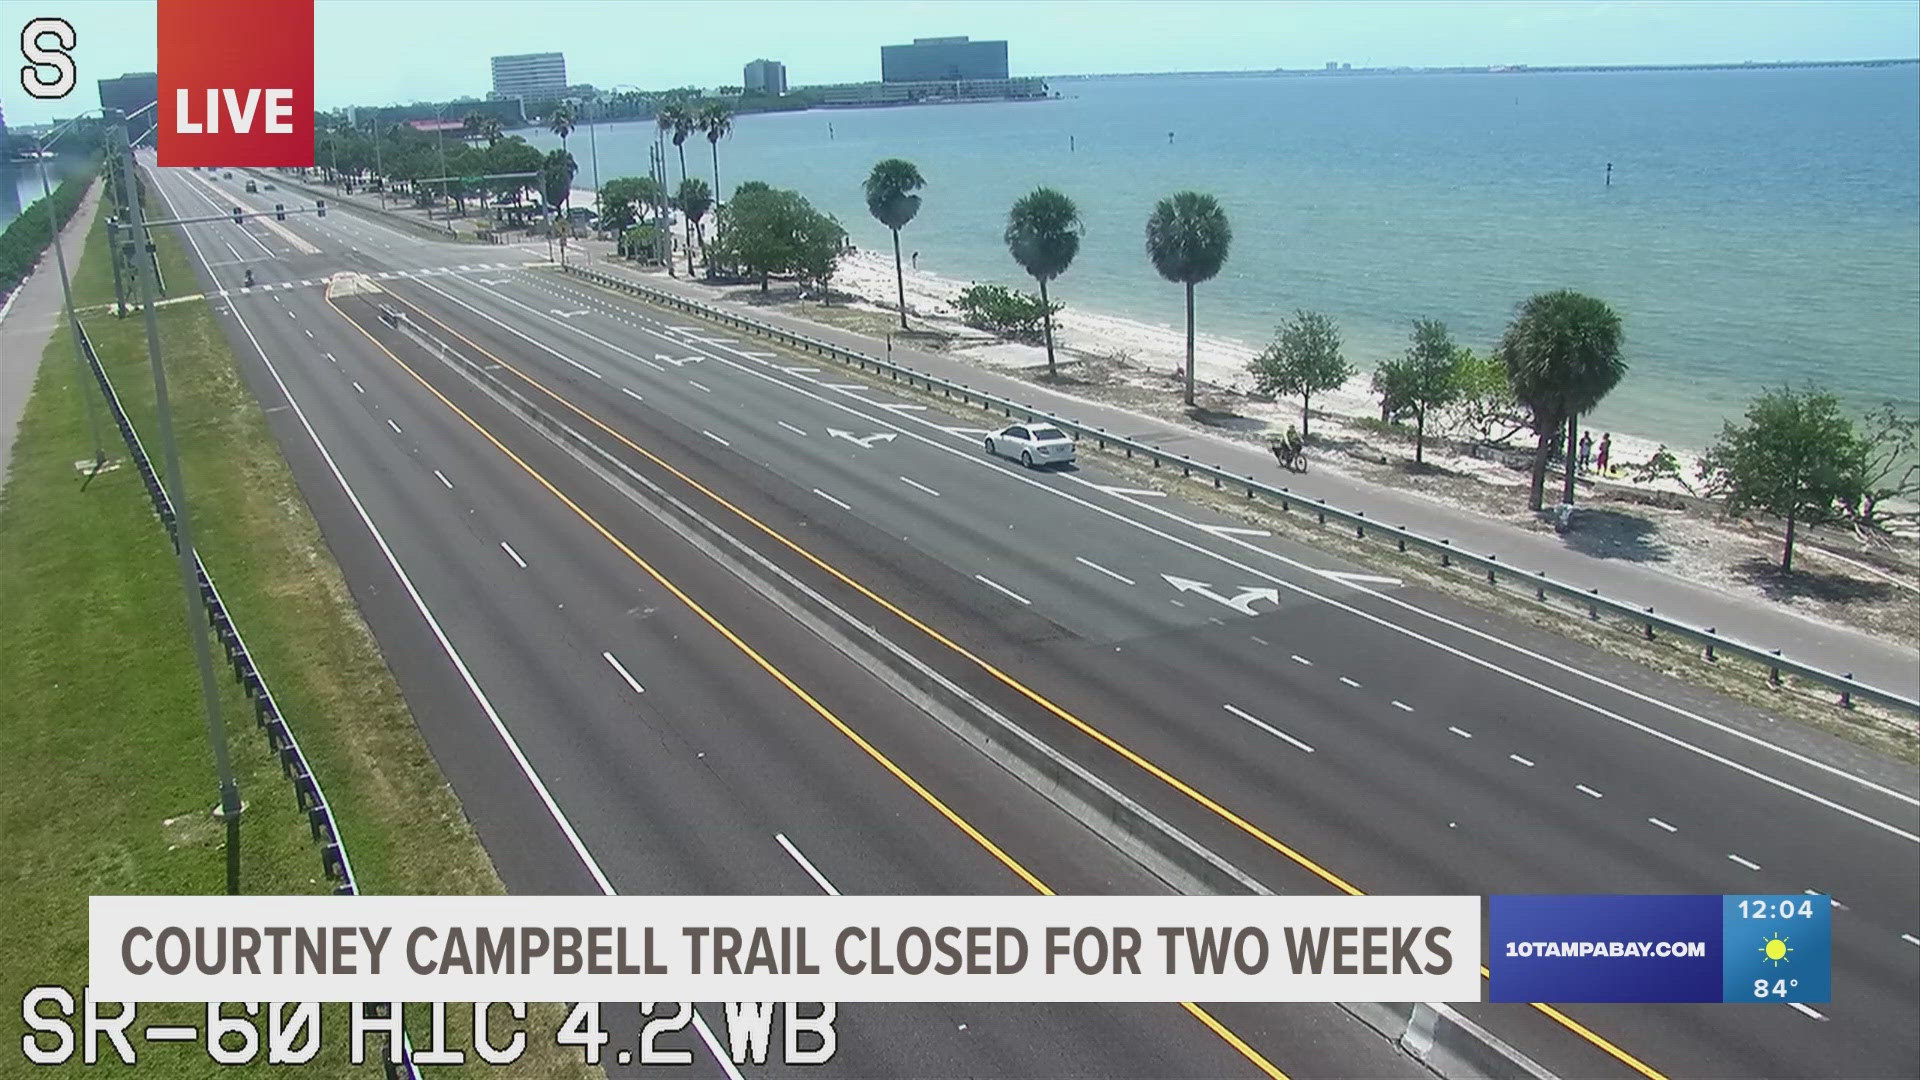 FDOT says the closure is expected to last for two weeks, depending on weather impacts.